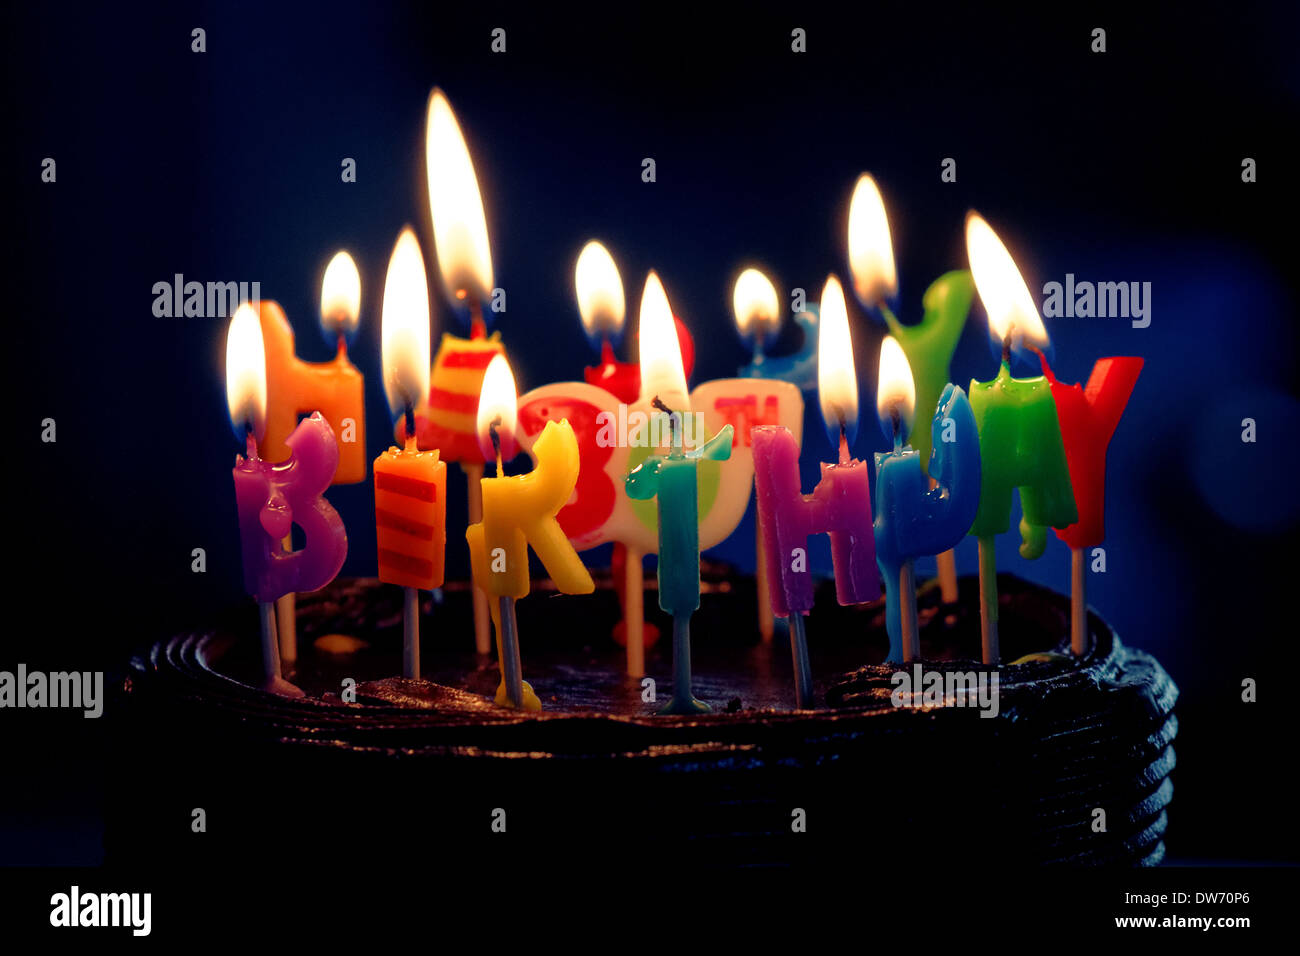 Birthday Cake with Candles Stock Photo